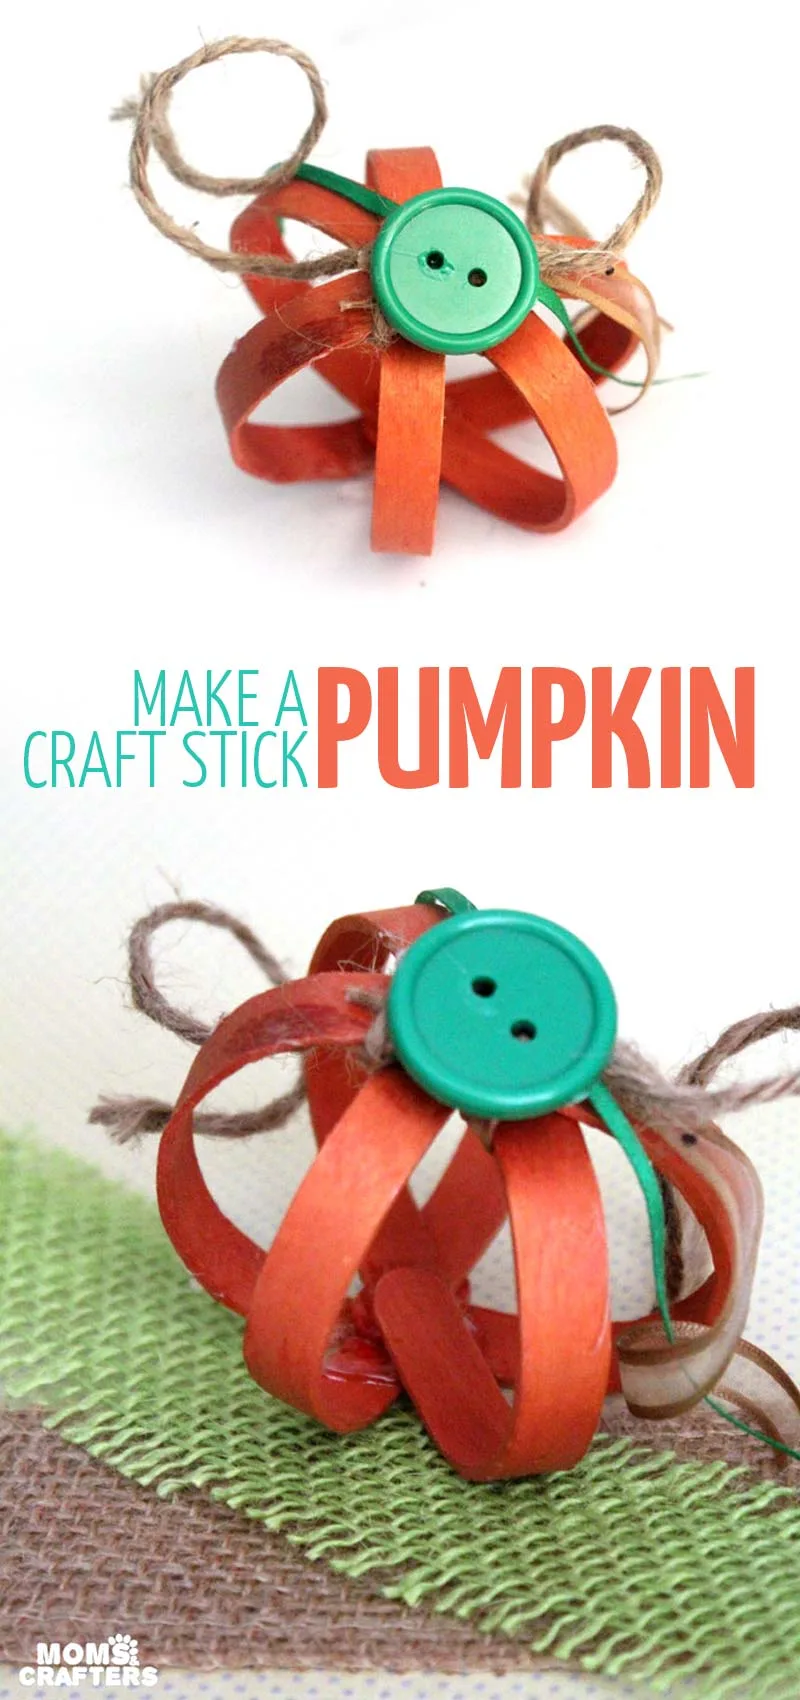 This bent craft stick pumpkin craft is so adorable - you'll want to make a lot for your Autumn or Halloween decor! It's an easy fall mantel decor idea and a simple DIY for teens, or grown ups.